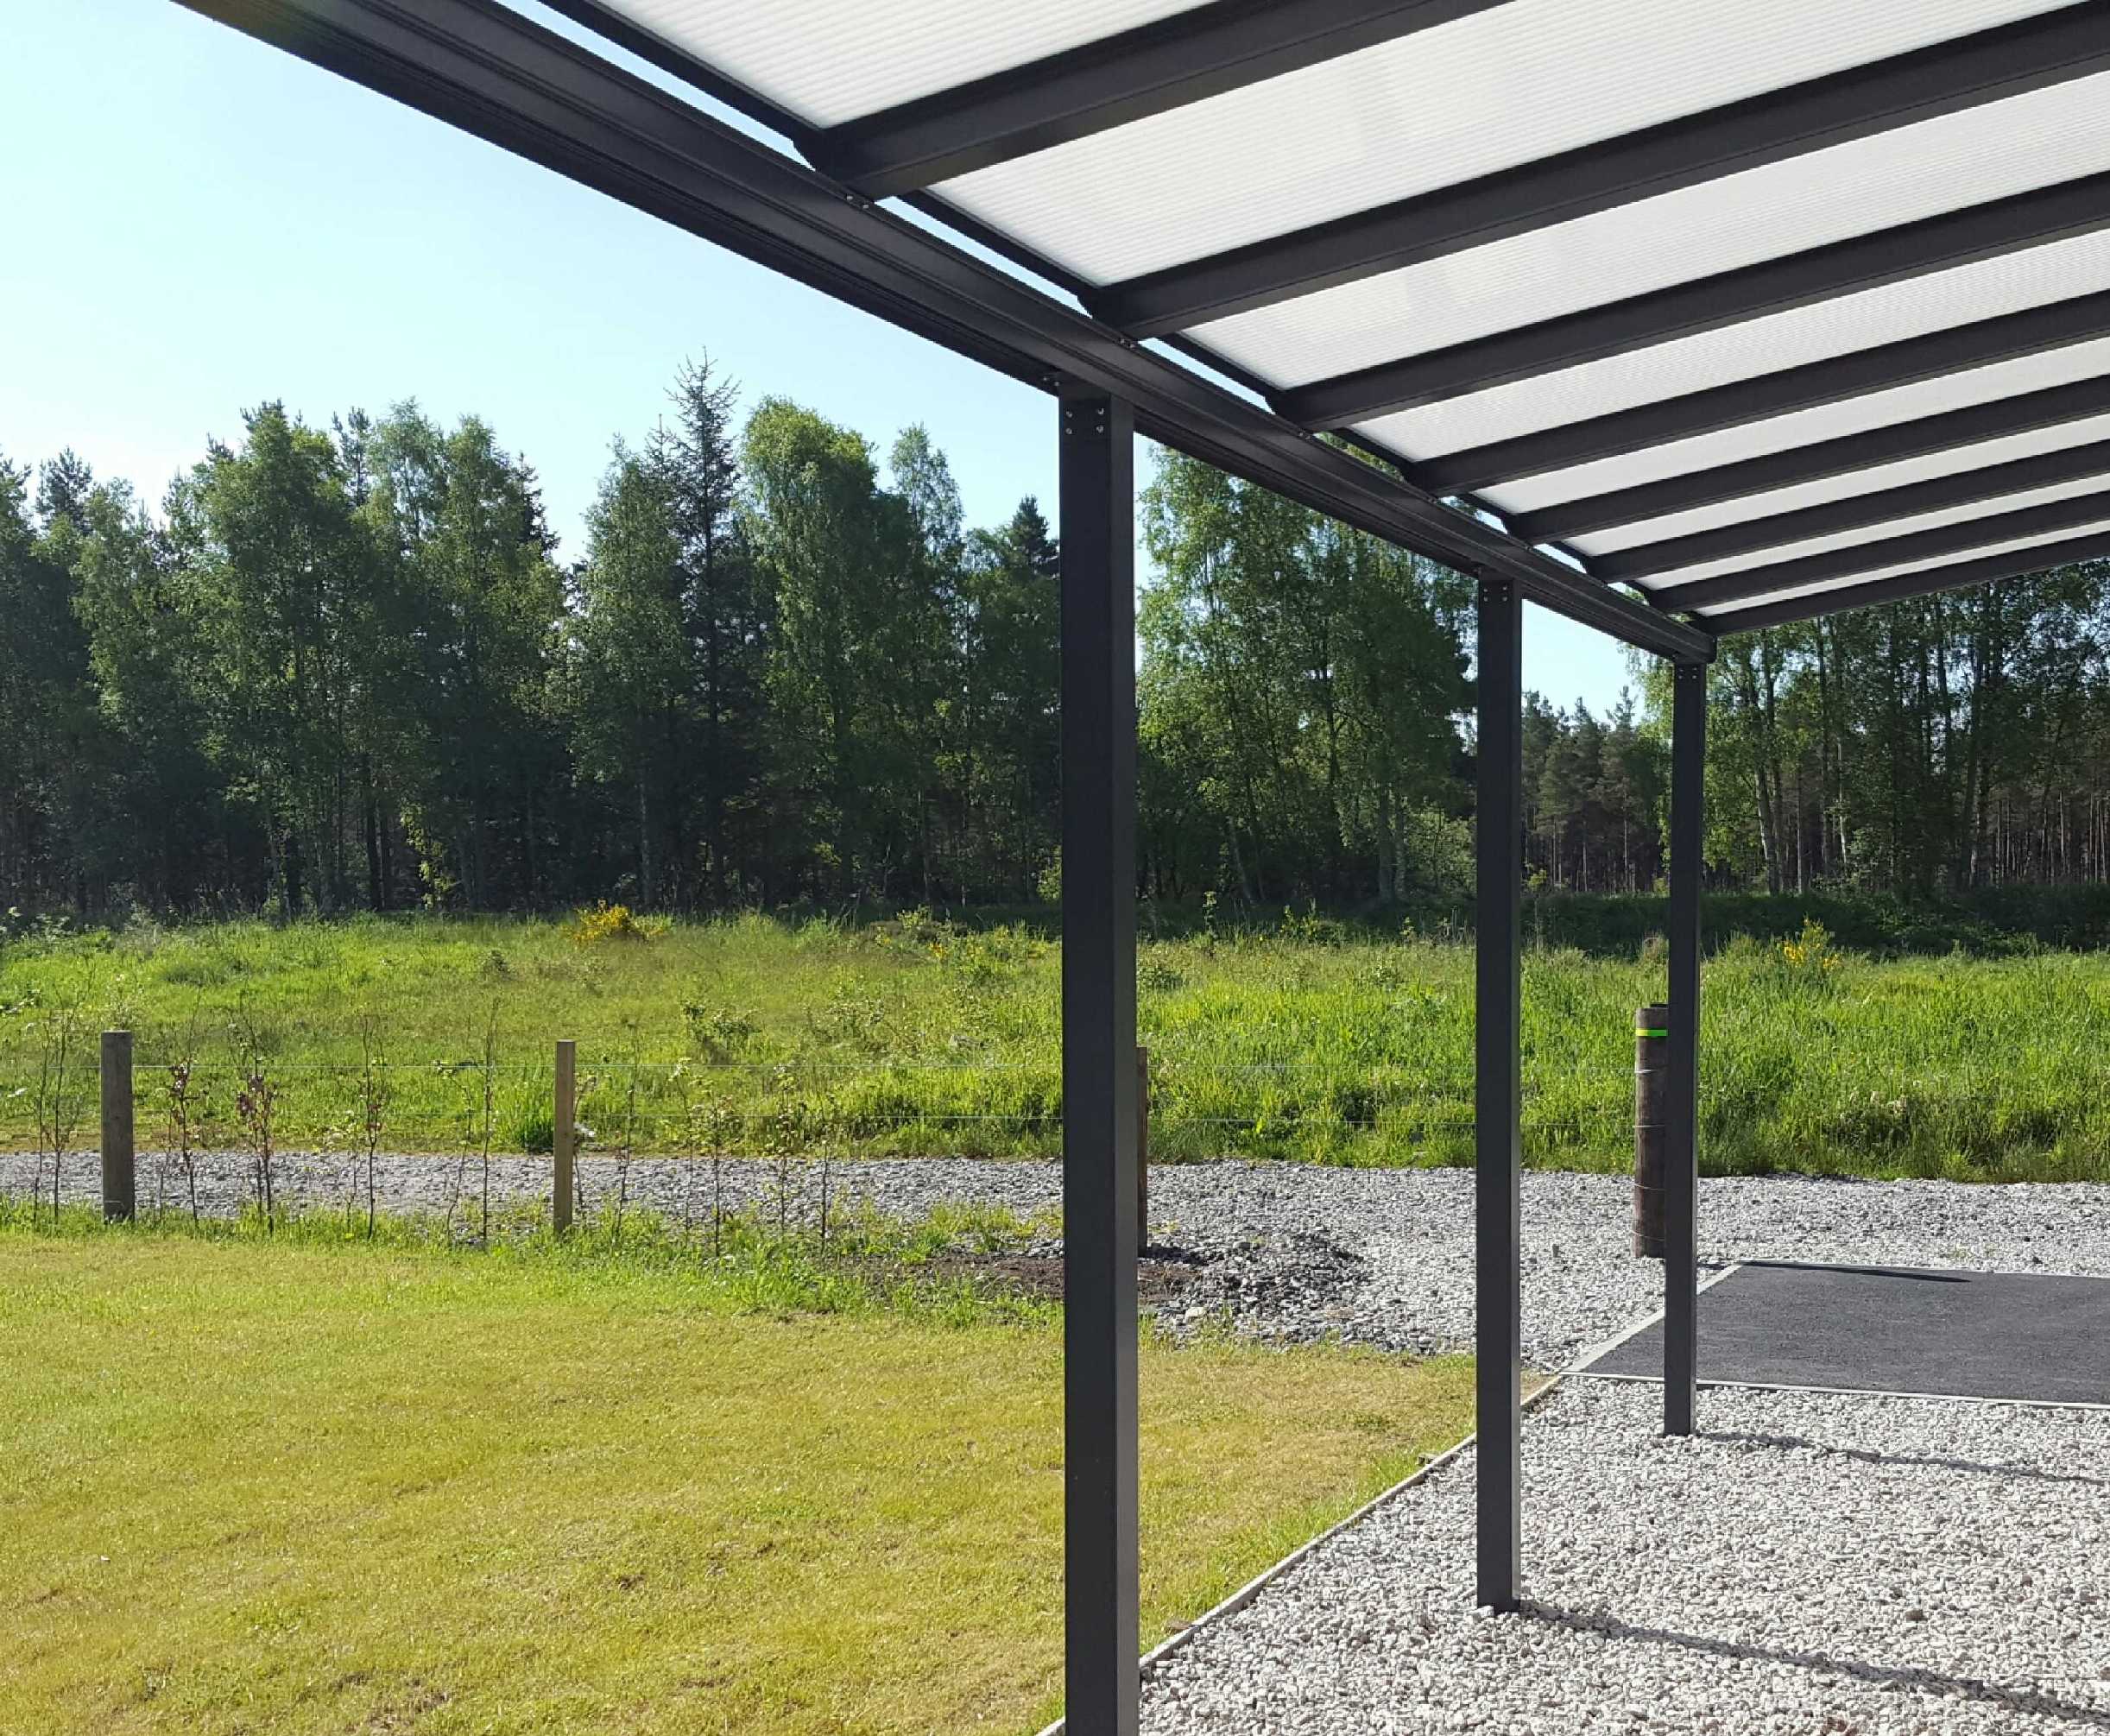 Omega Smart Lean-To Canopy, Anthracite Grey, 6mm Glass Clear Plate Polycarbonate Glazing - 2.8m (W) x 2.5m (P), (2) Supporting Posts